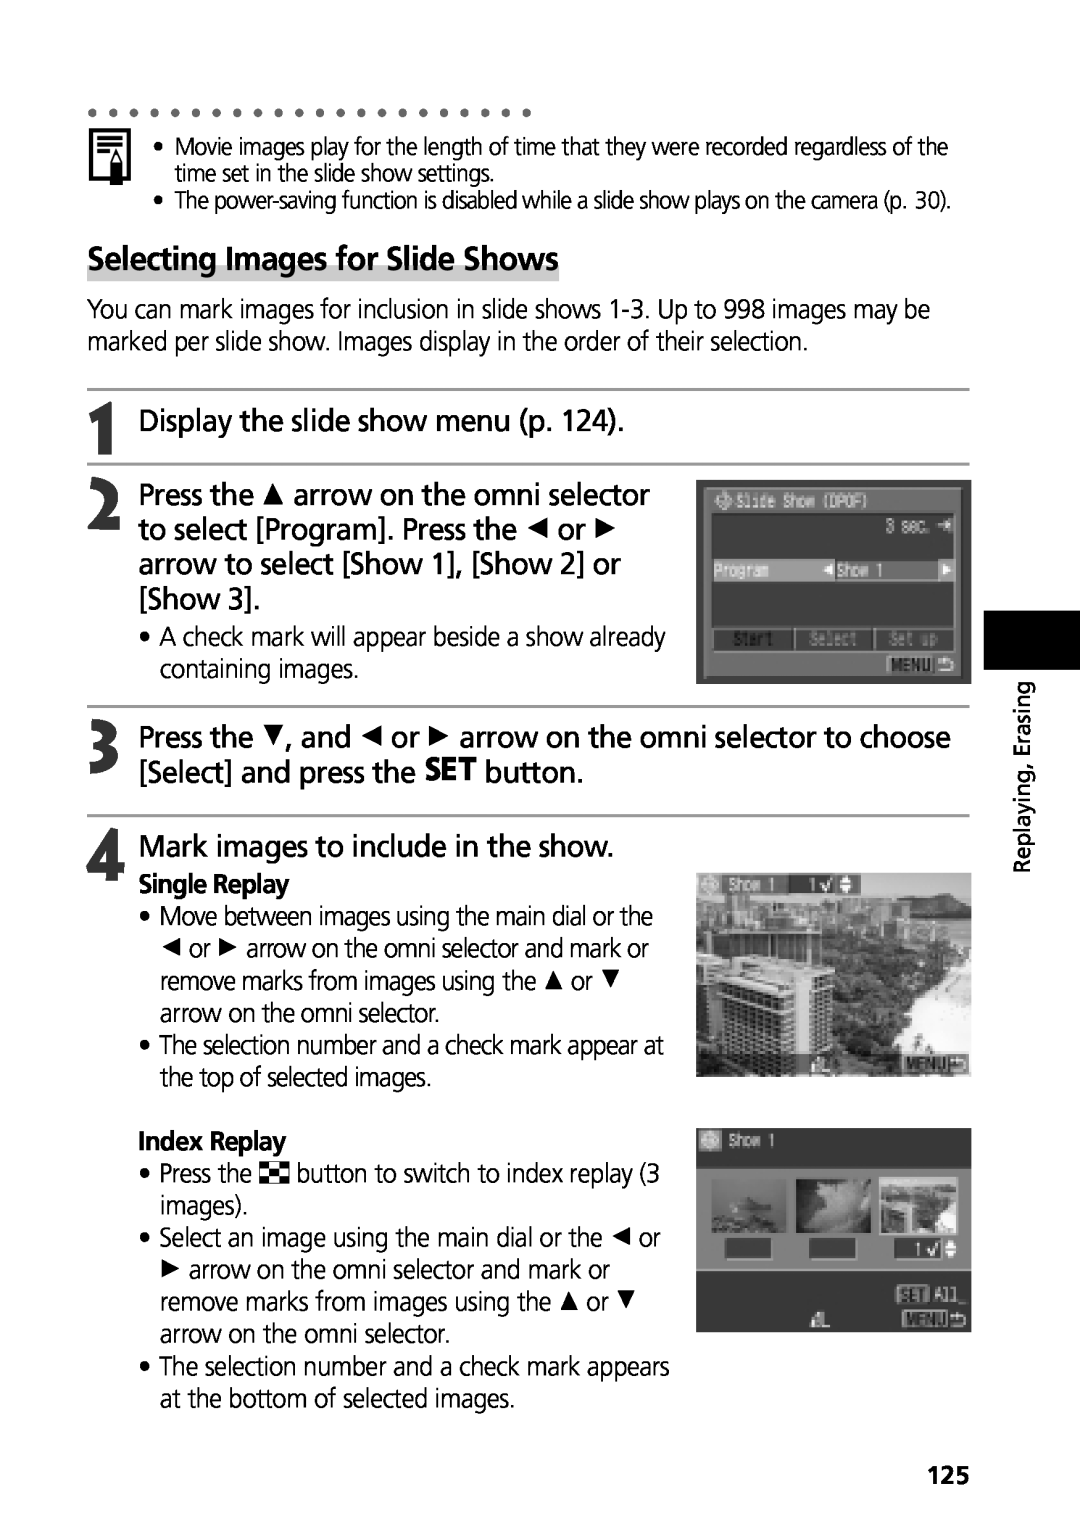 Canon G3 manual Selecting Images for Slide Shows, Display the slide show menu p, Single Replay, Index Replay 